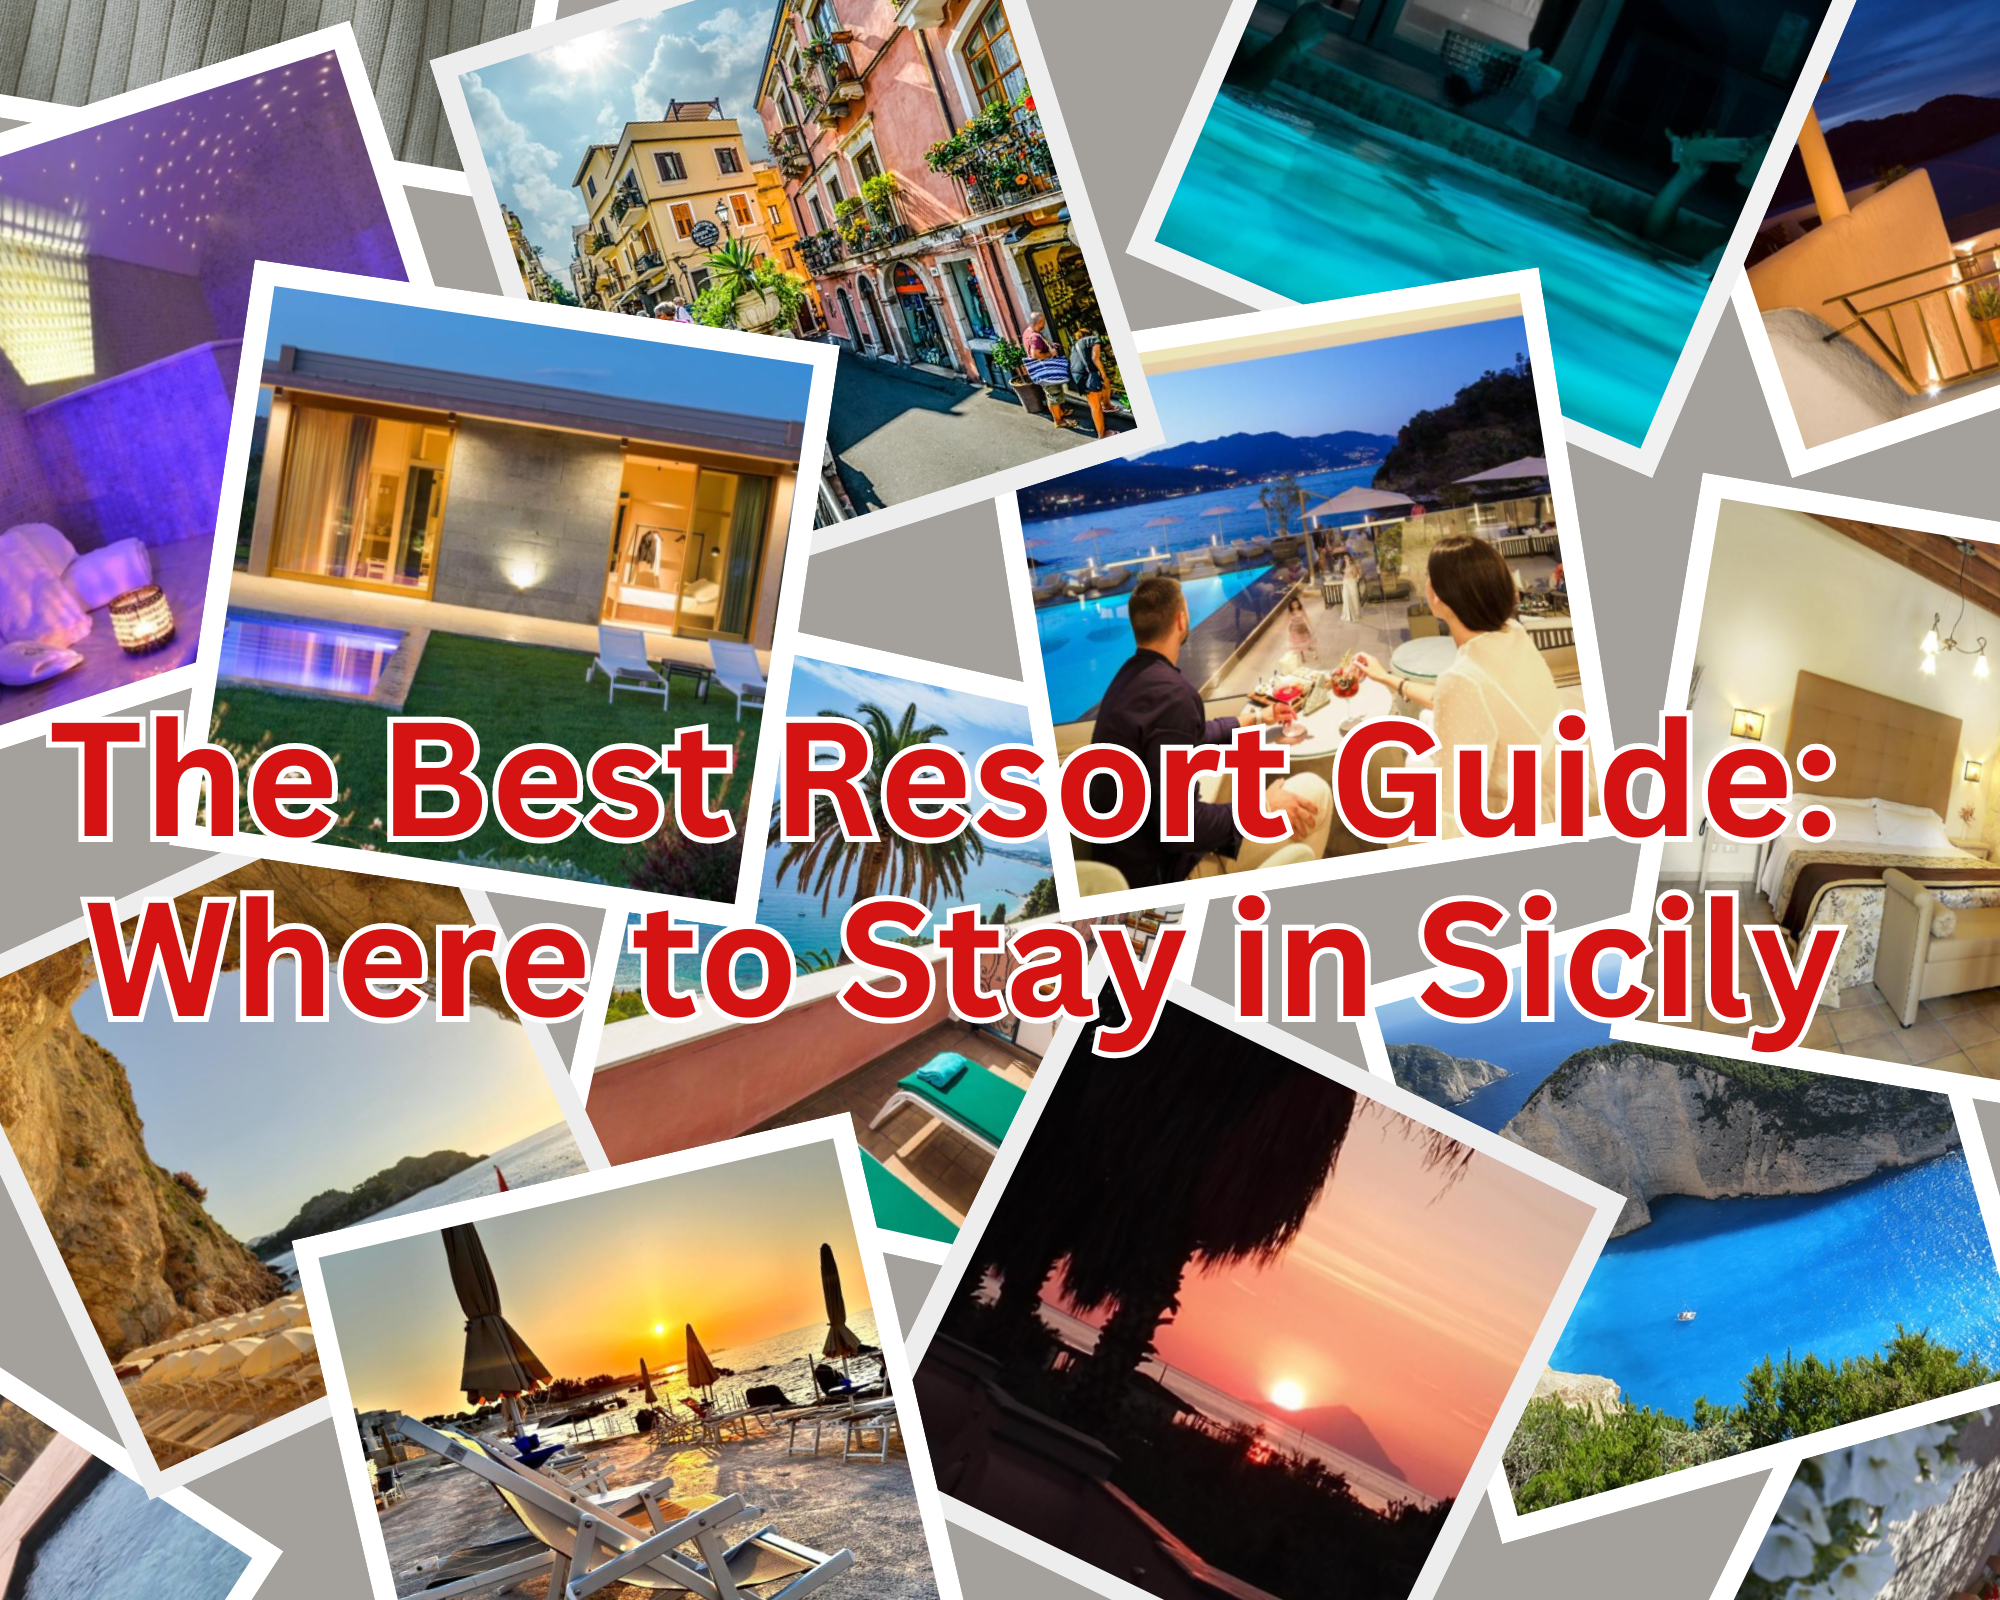 Best Resort Guide Where to Stay in Sicily